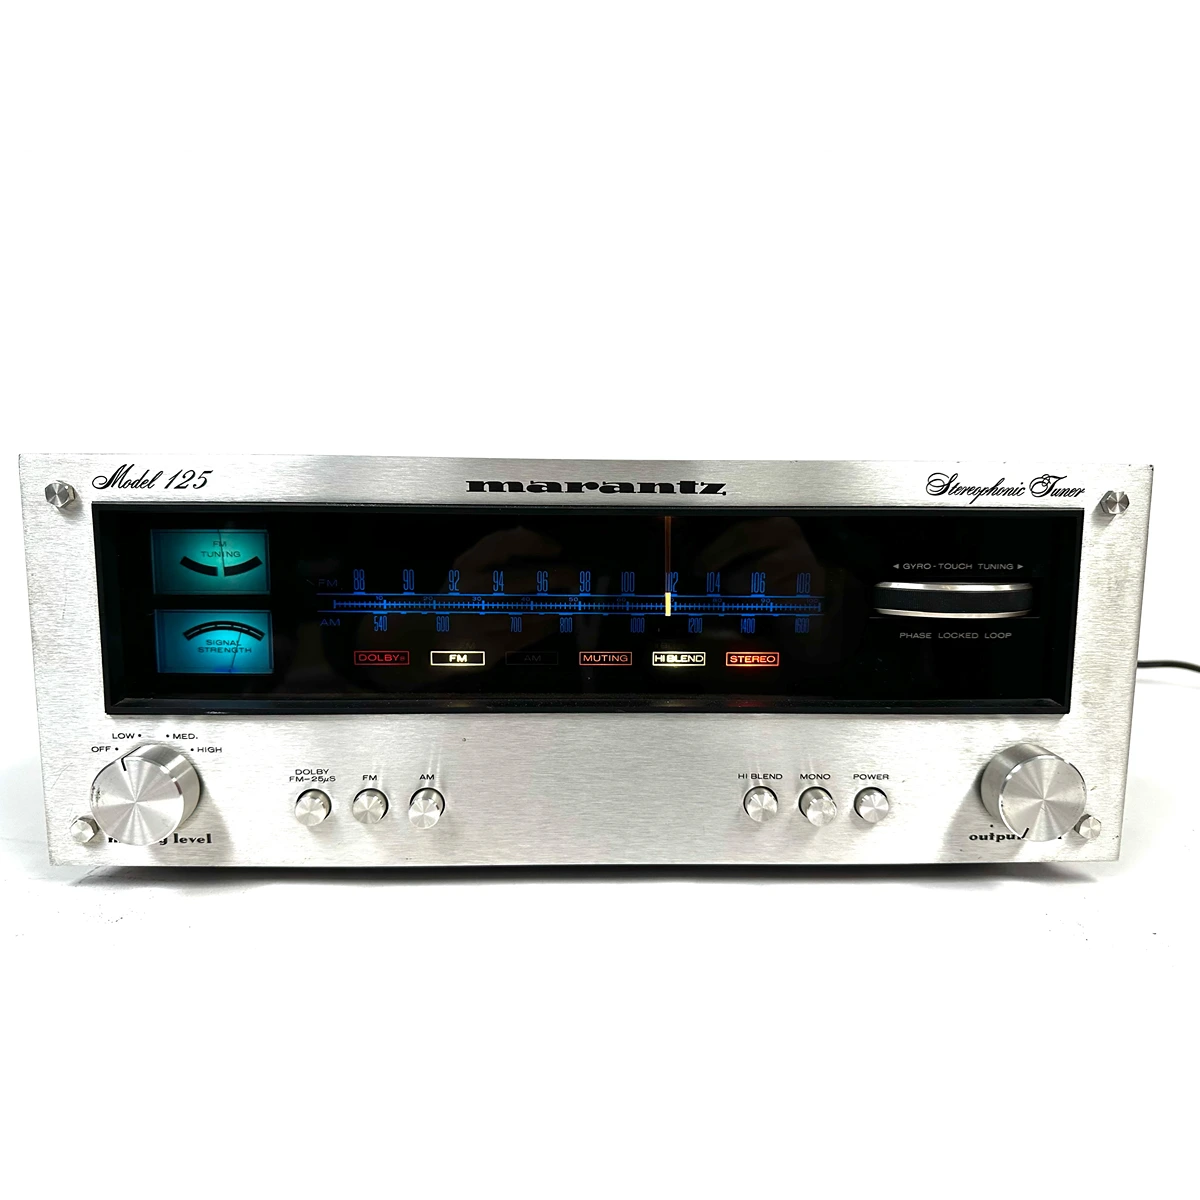 Marantz Model 125 - Solid State AM/FM Stereophonic Tuner